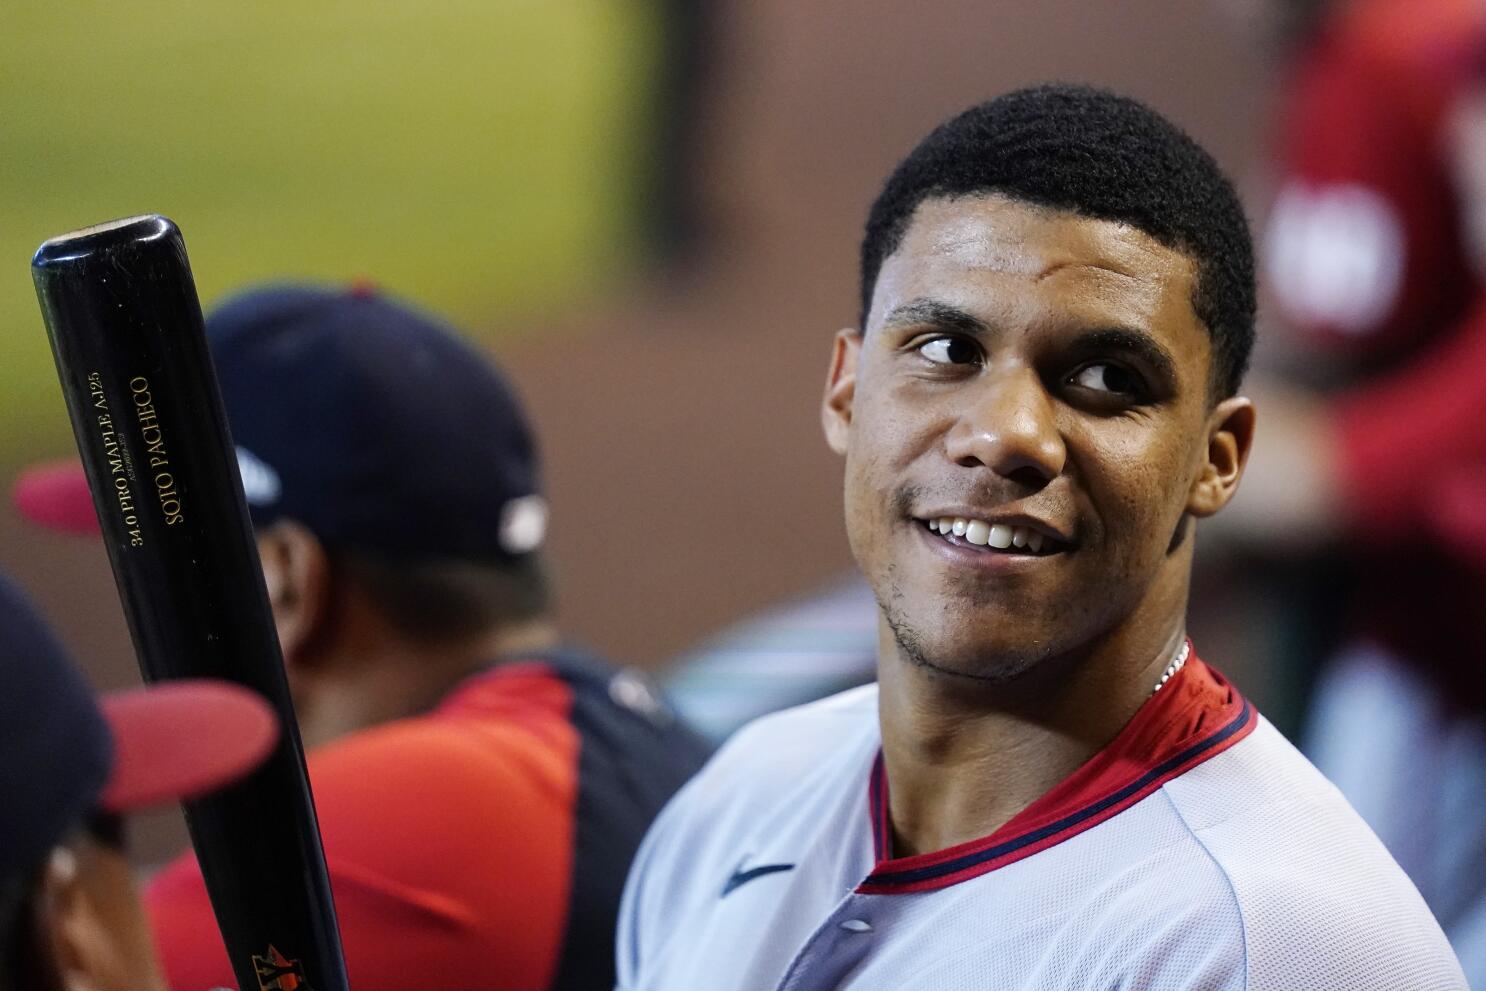 Padres star Juan Soto stays hot in return to Nationals